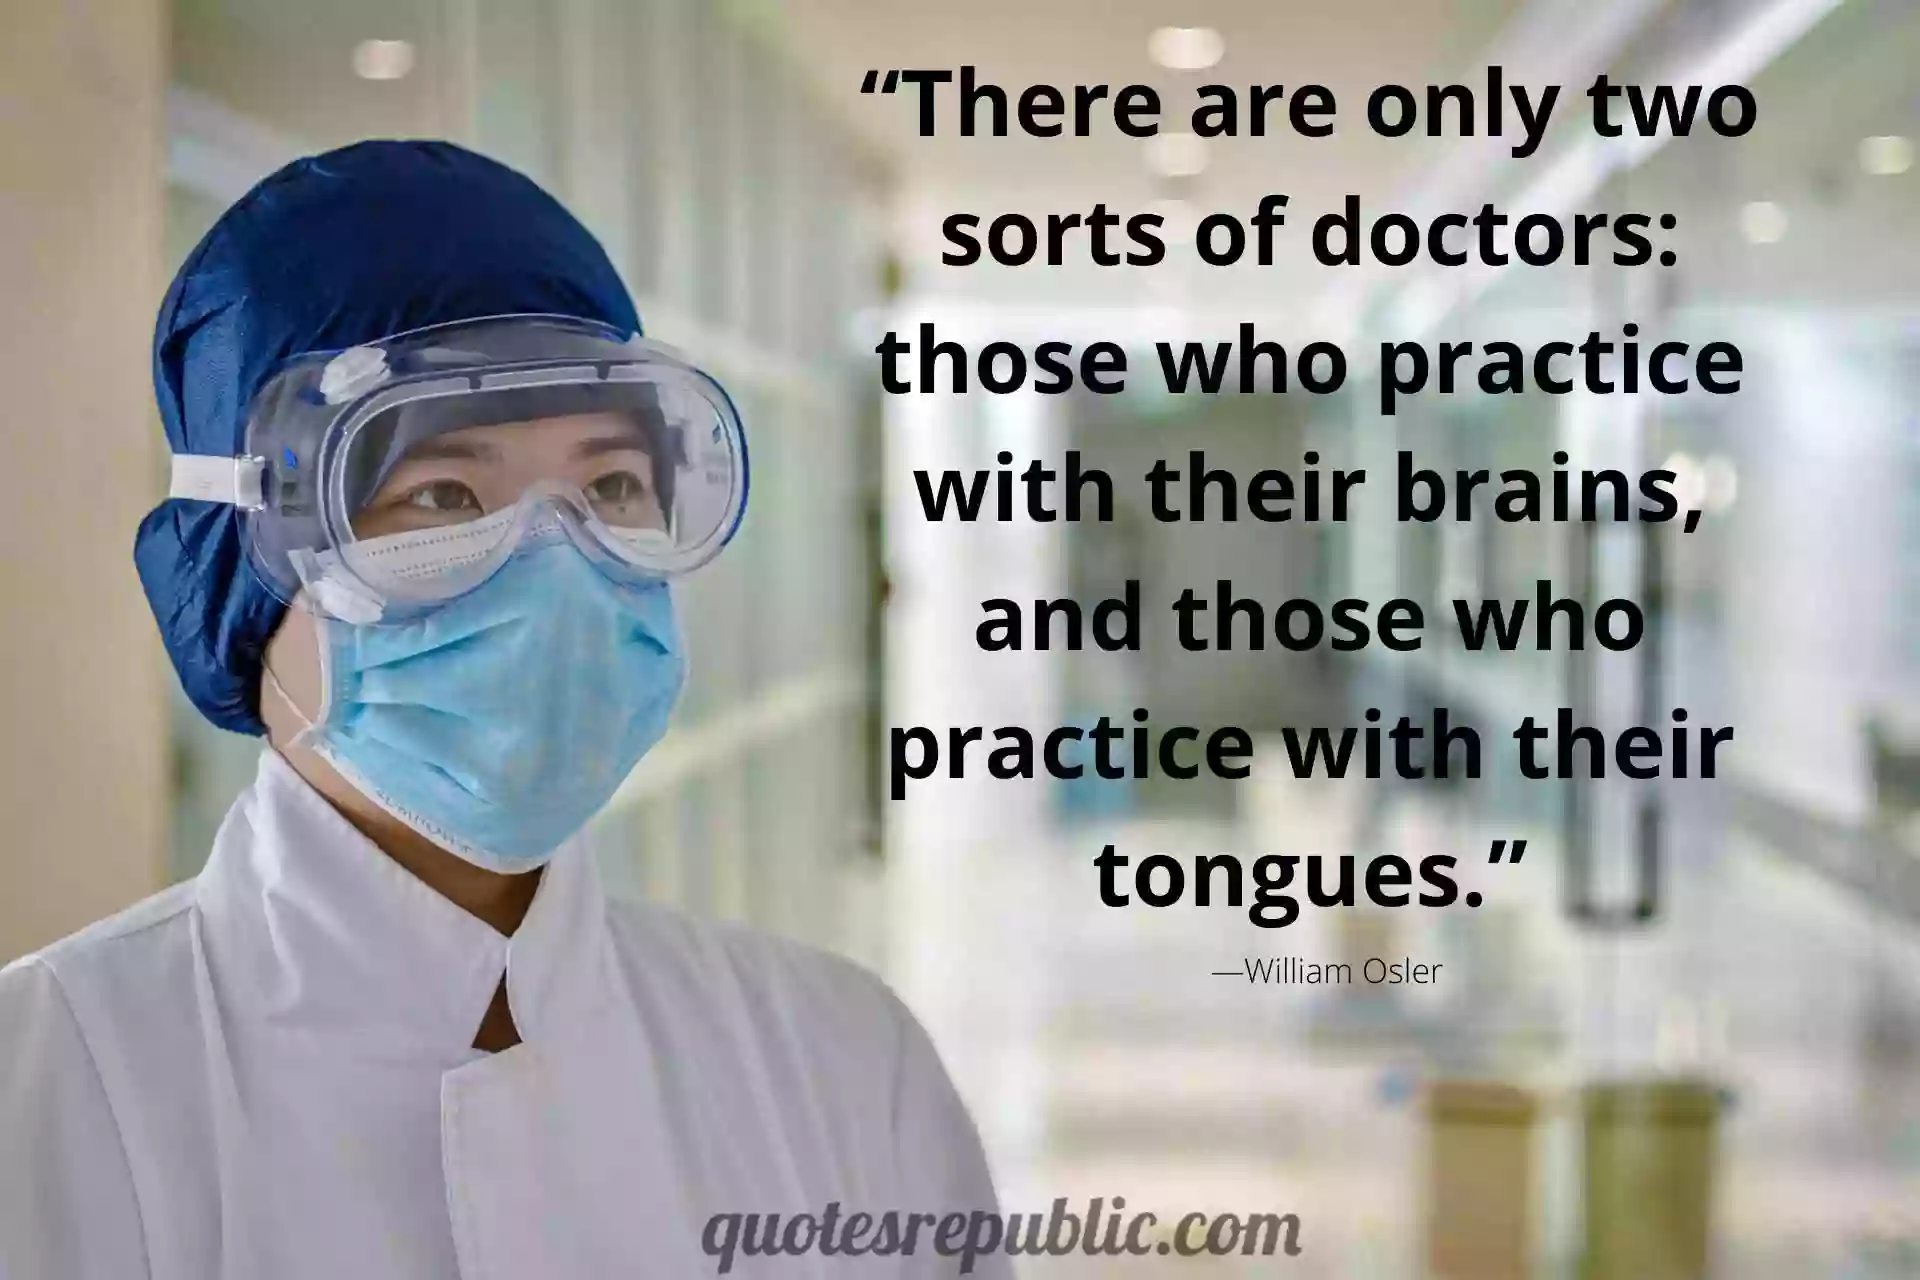 Motivational Quotes For Medical Students